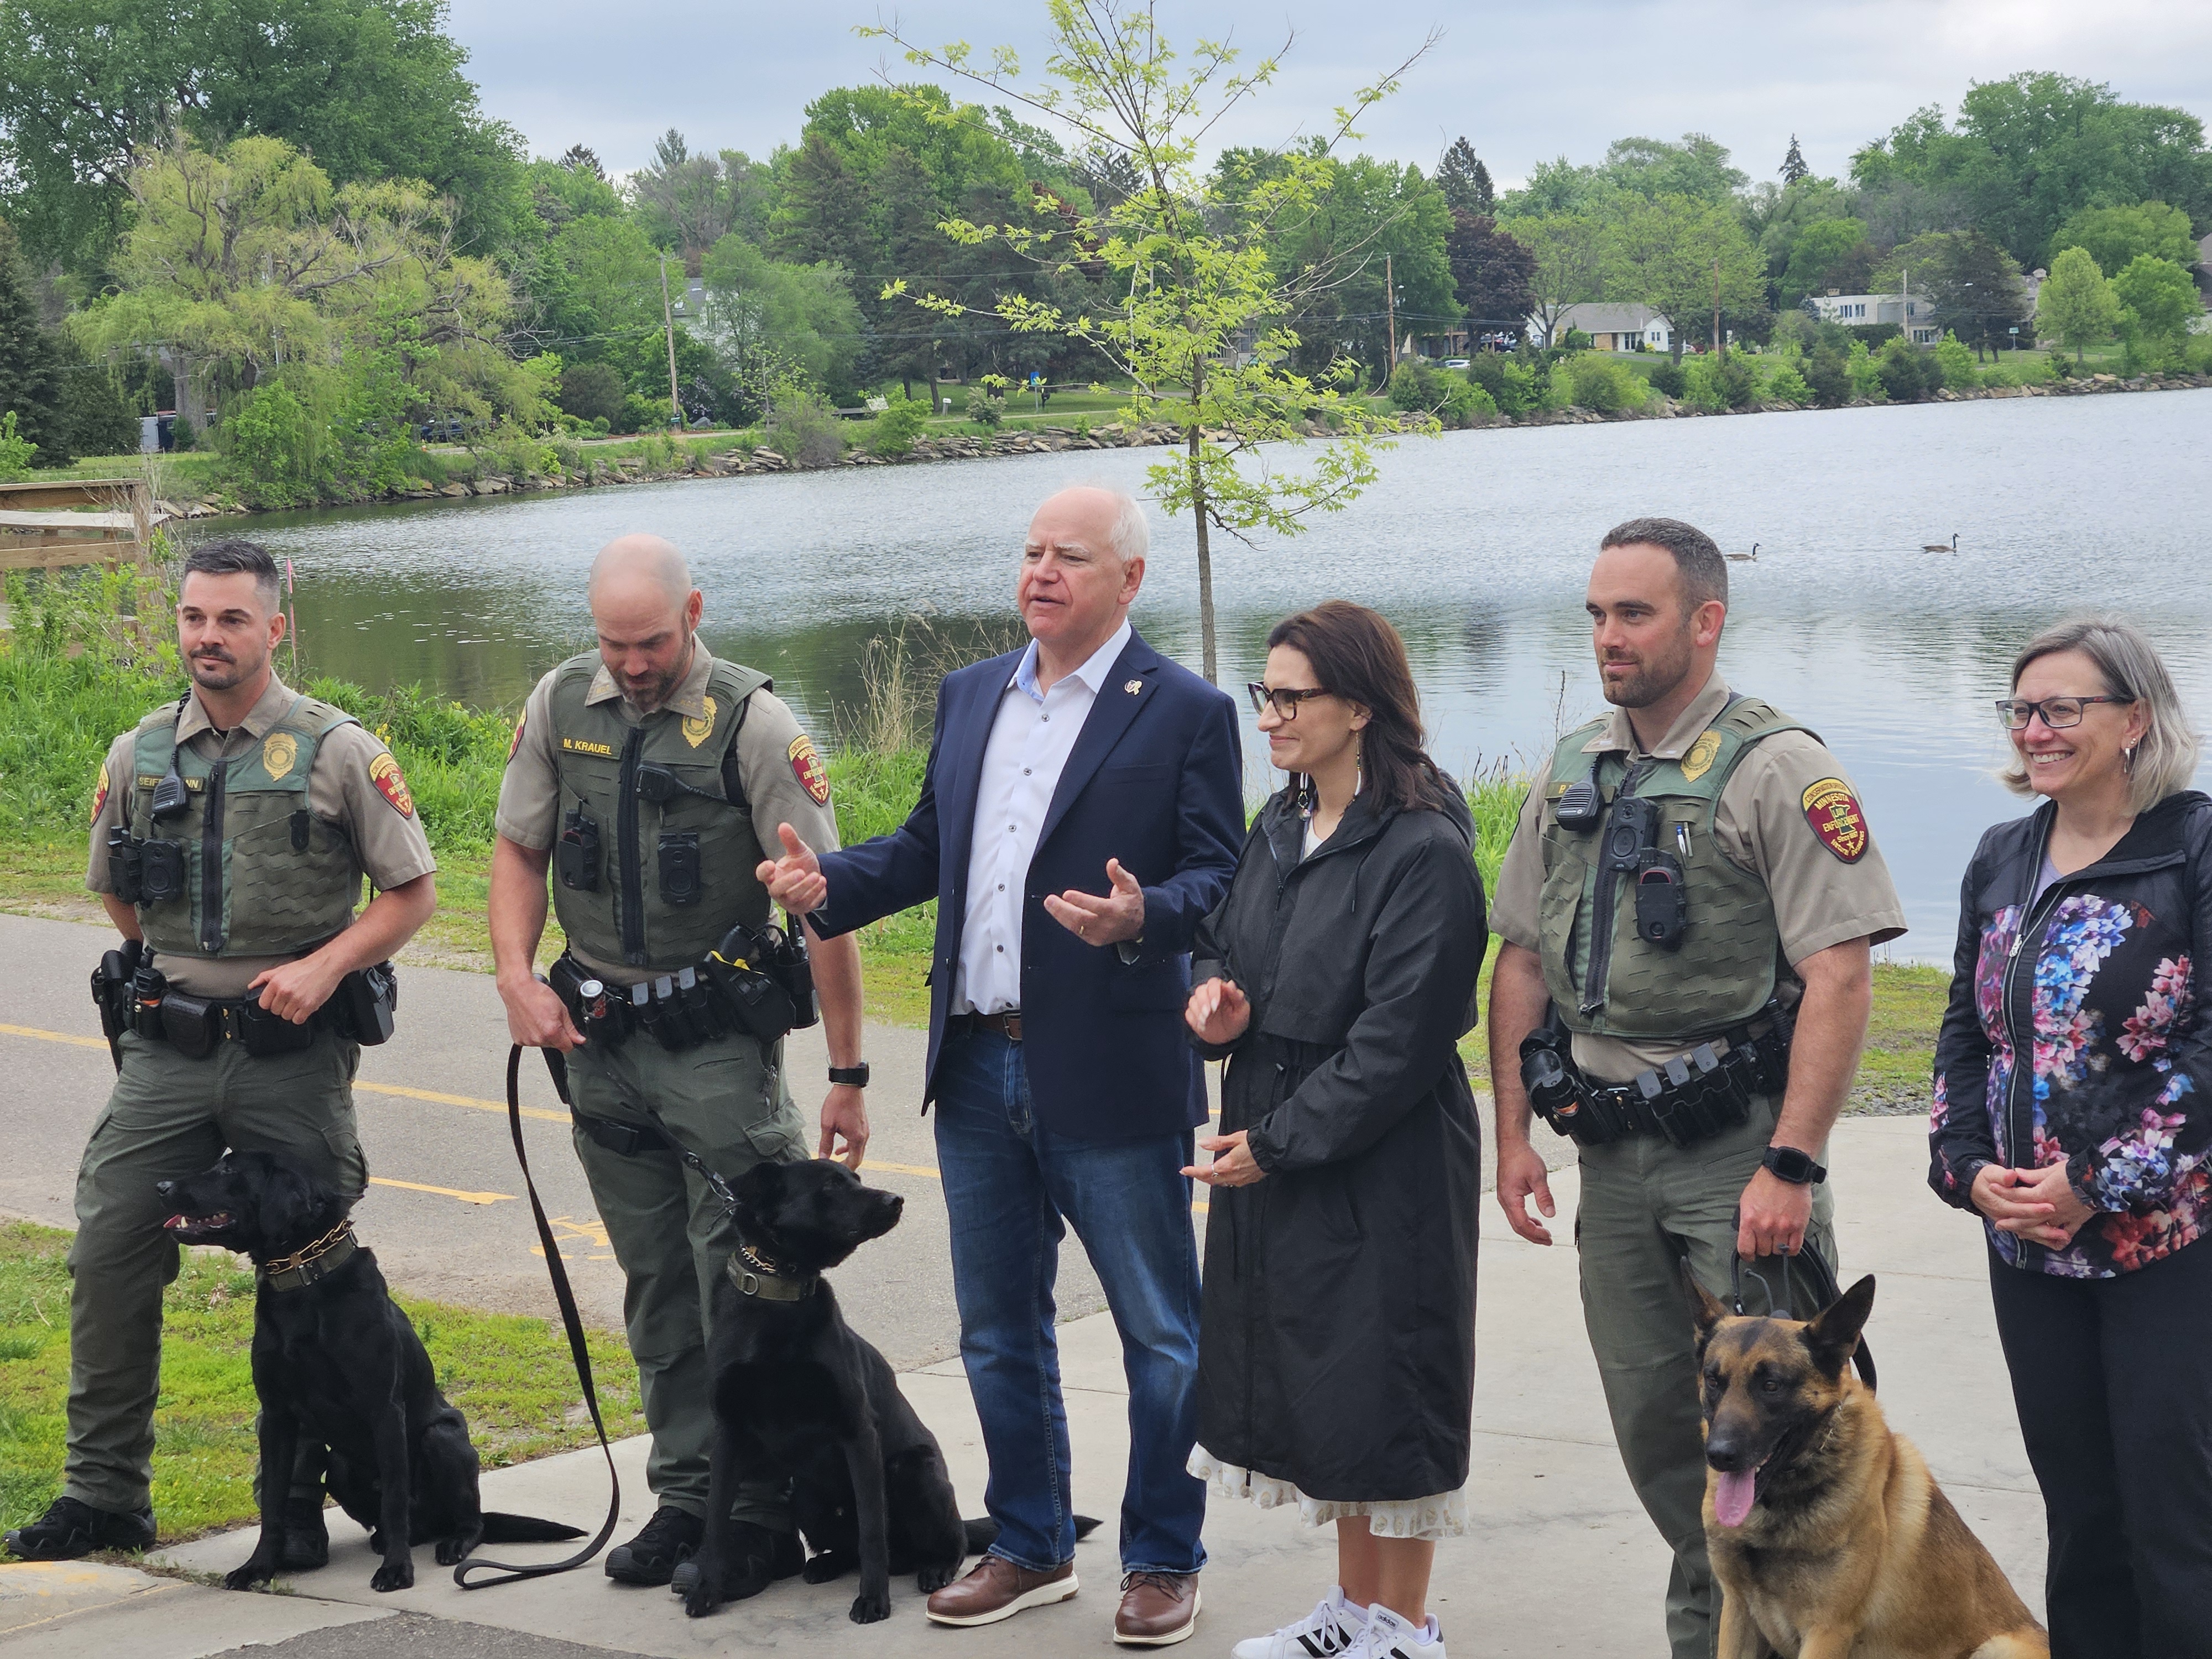 Govenor Walz, Lieutenant Governor Flanagan, DNR Commissioner Sarah Strommen, and four DNR officers along with their DNR sniffing dogs are posed in a photo in front of a lake. 